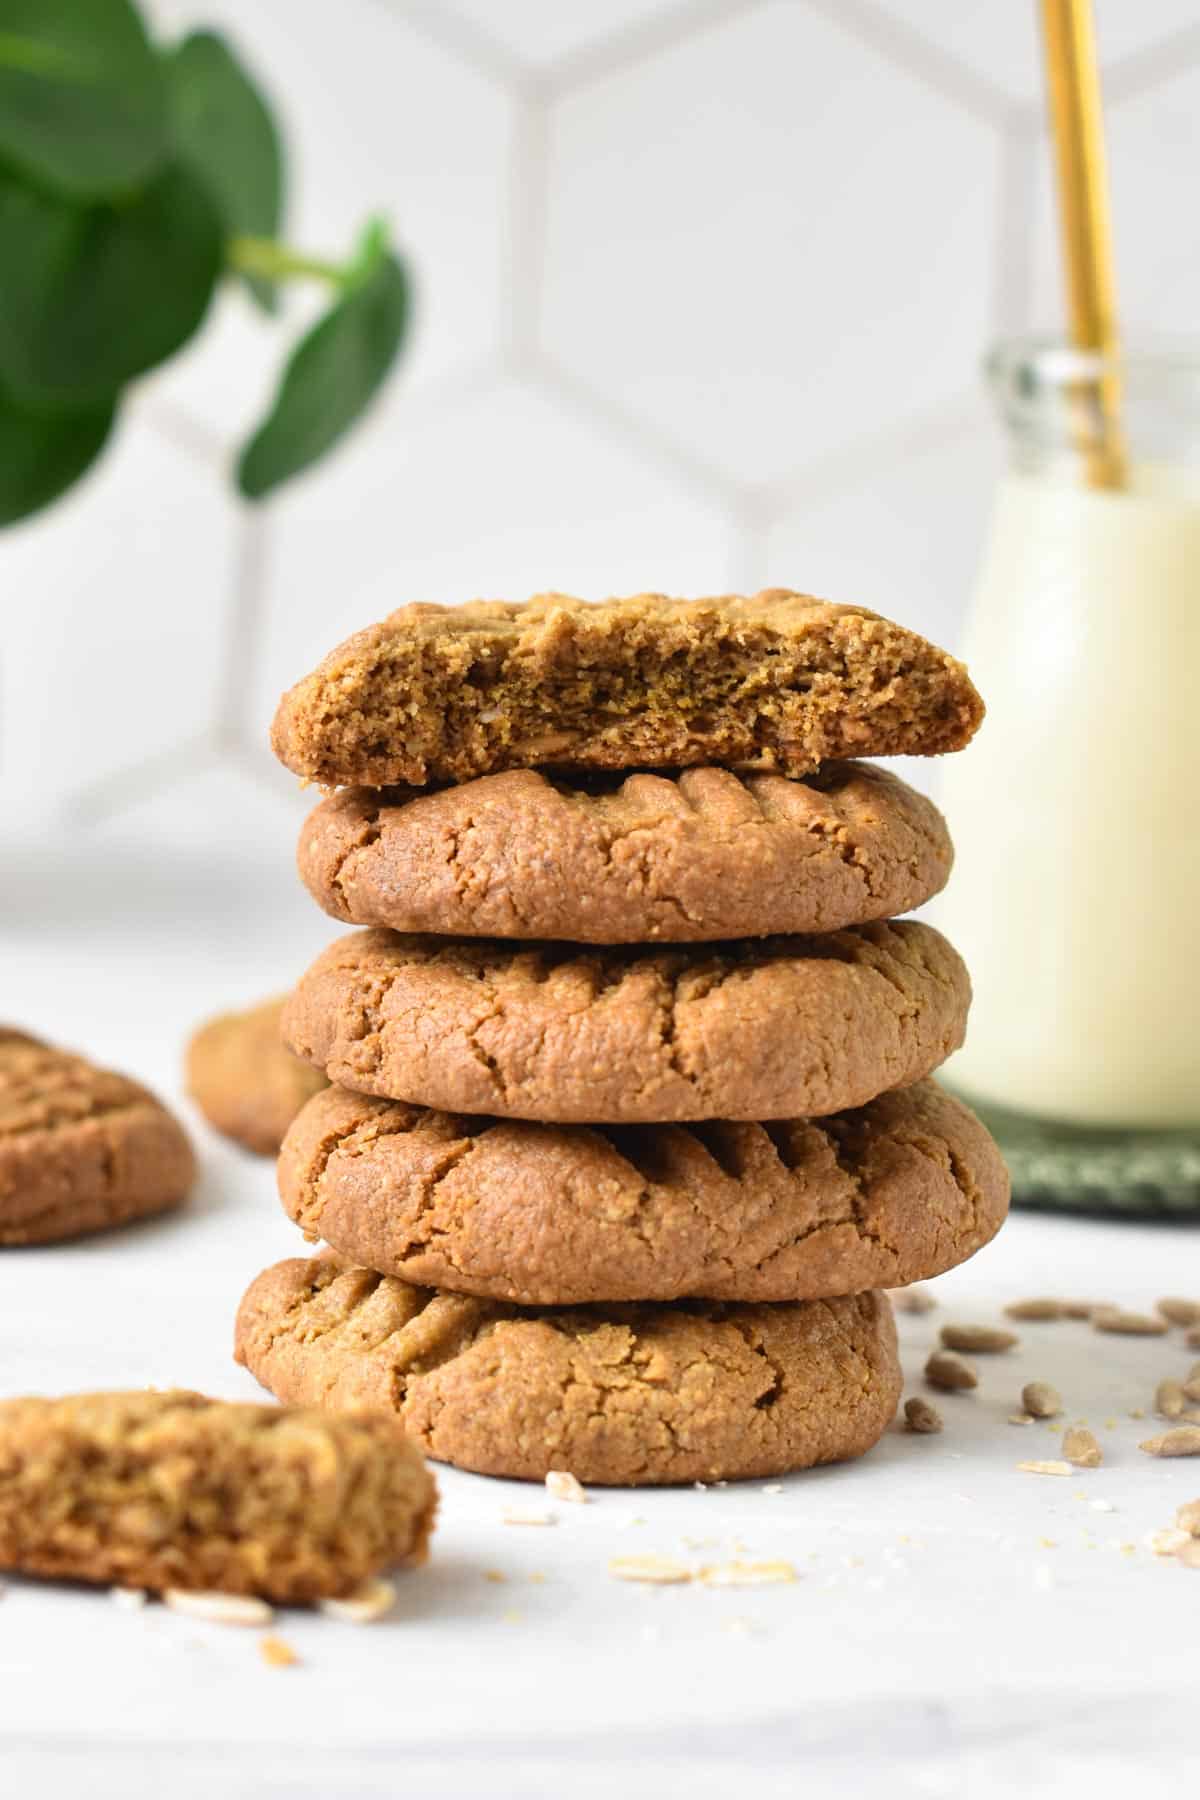 A stack of sunflower seed butter cookies with the one on top half broken showing the golden brown color.